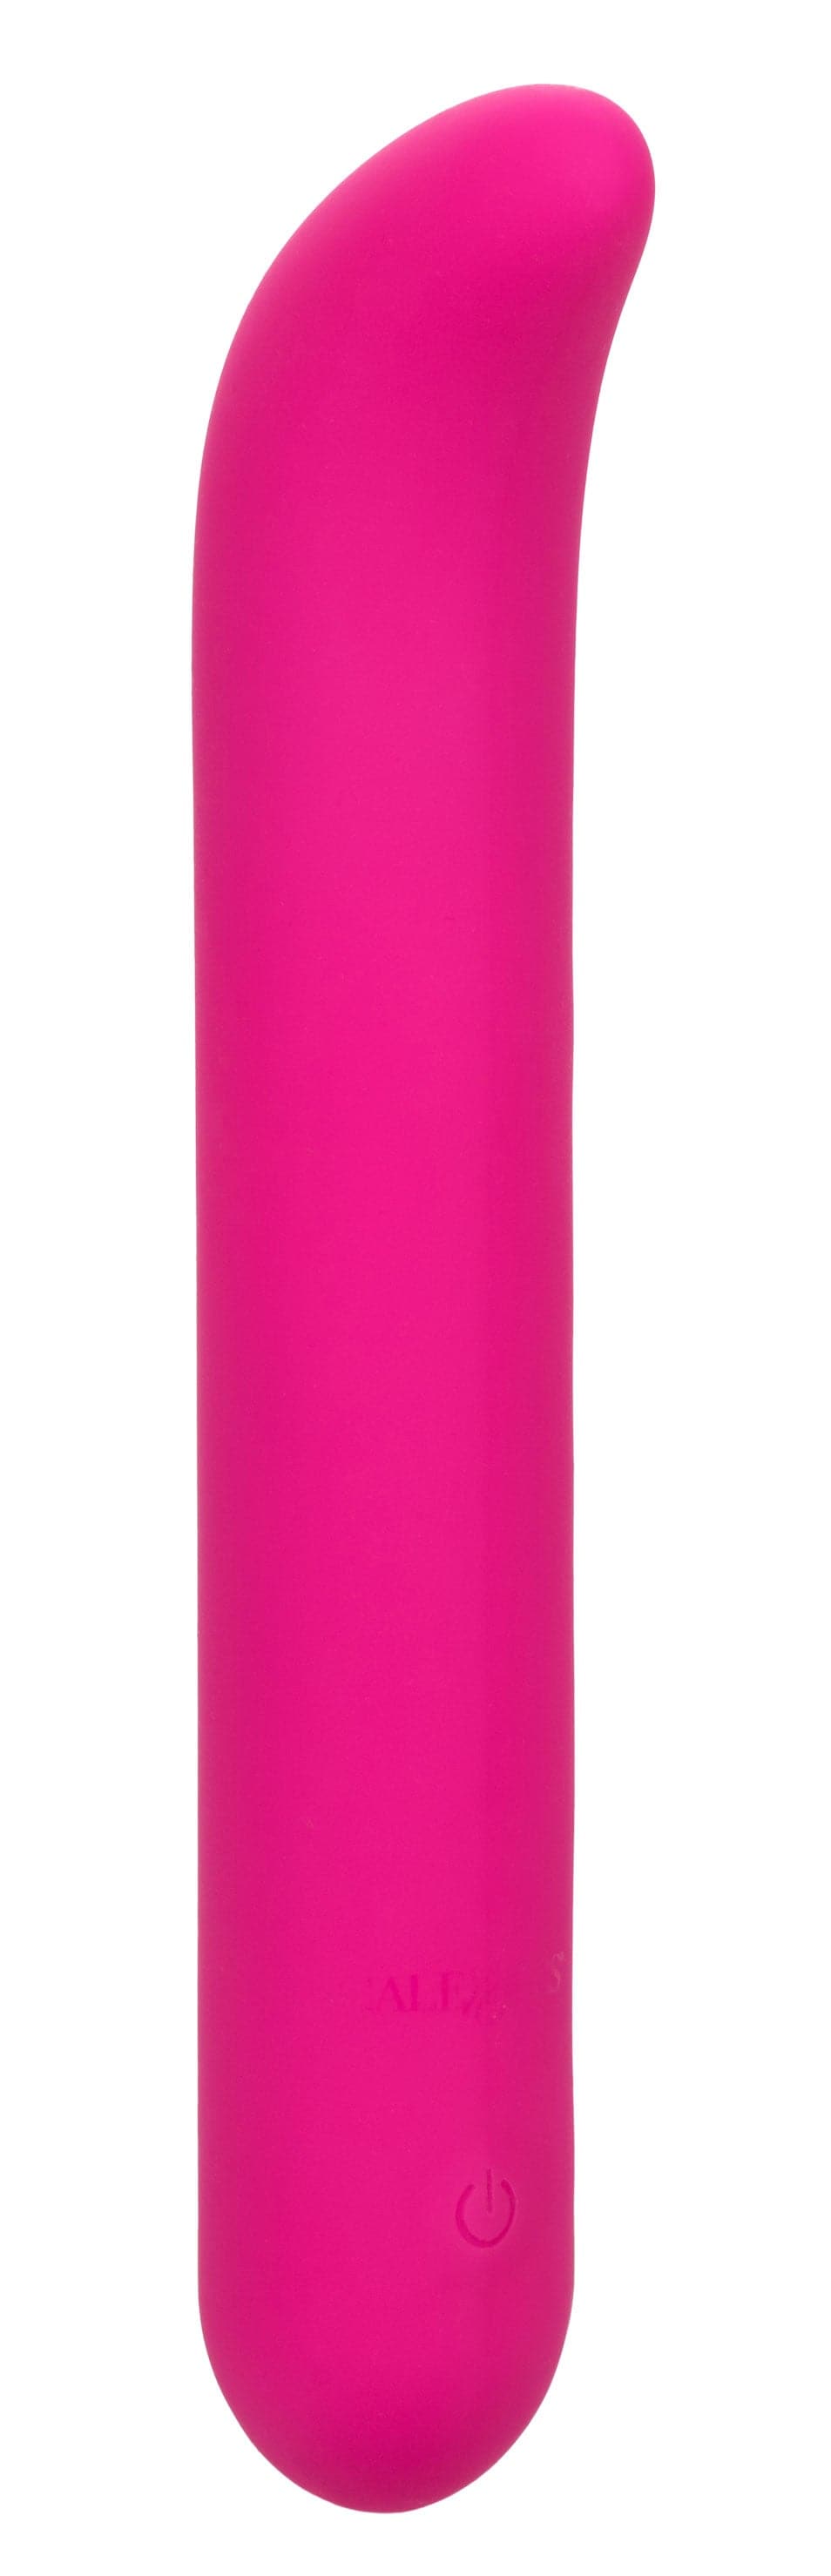 bliss liquid silicone g vibe pink